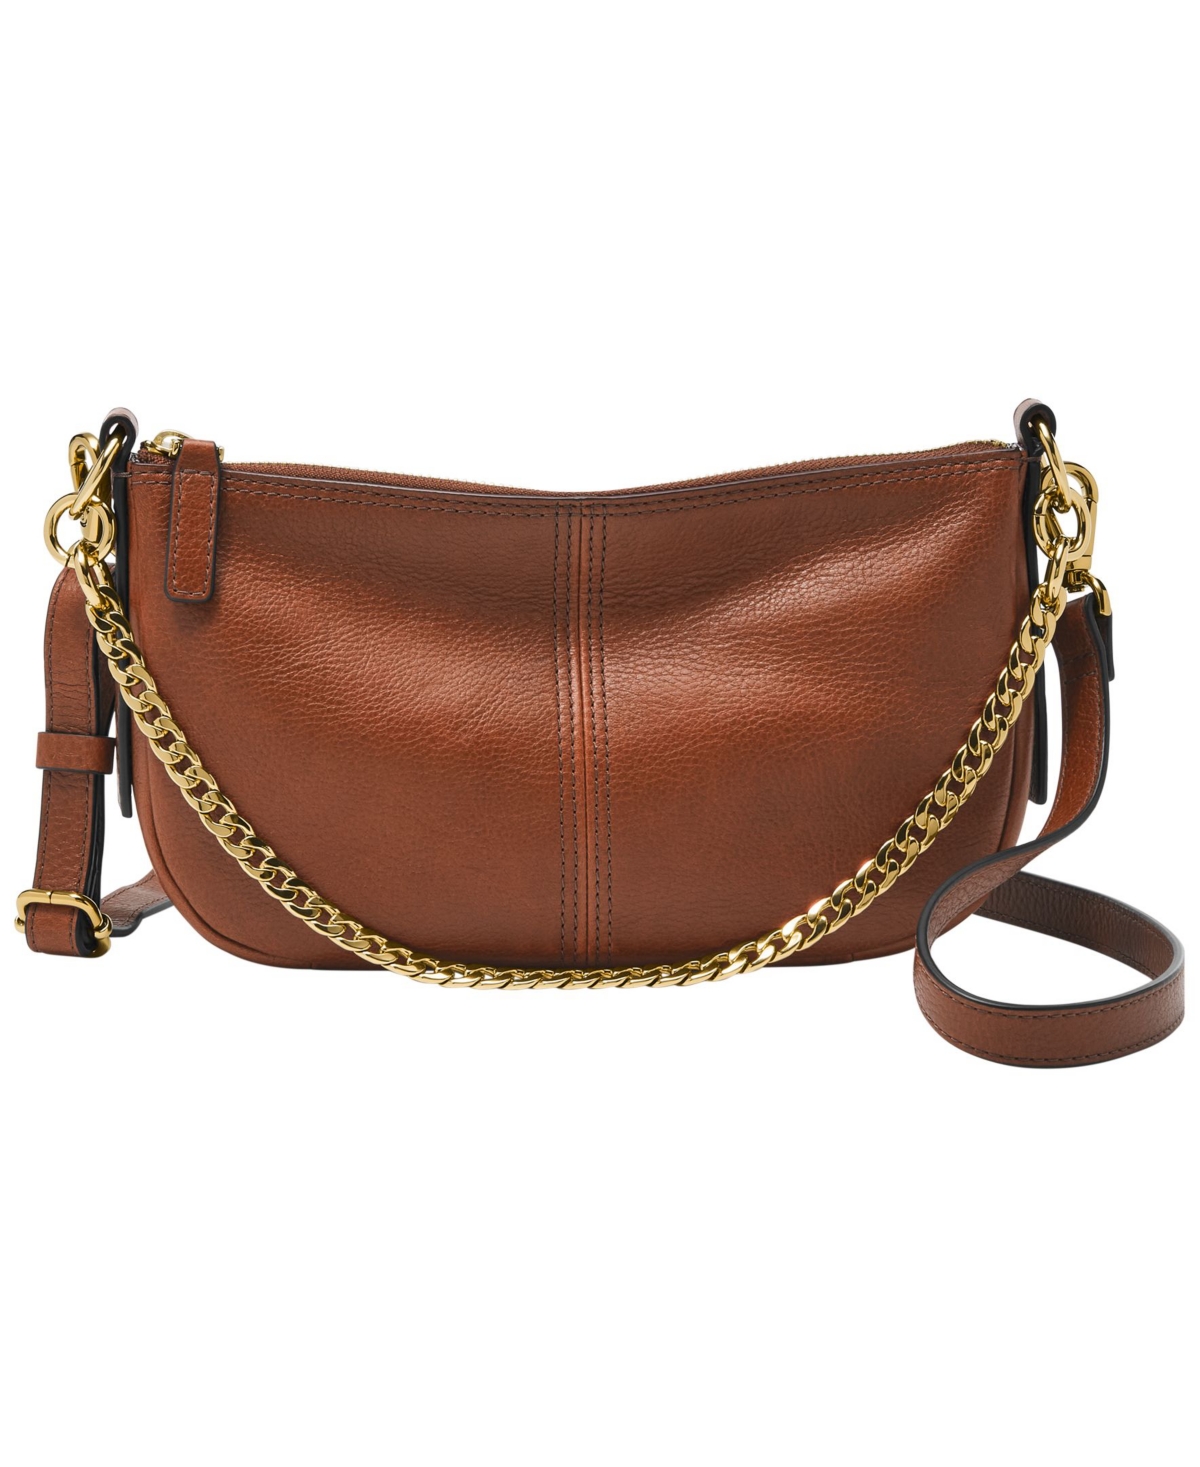 Fossil Jolie Convertible Leather Baguette Bag In Brown